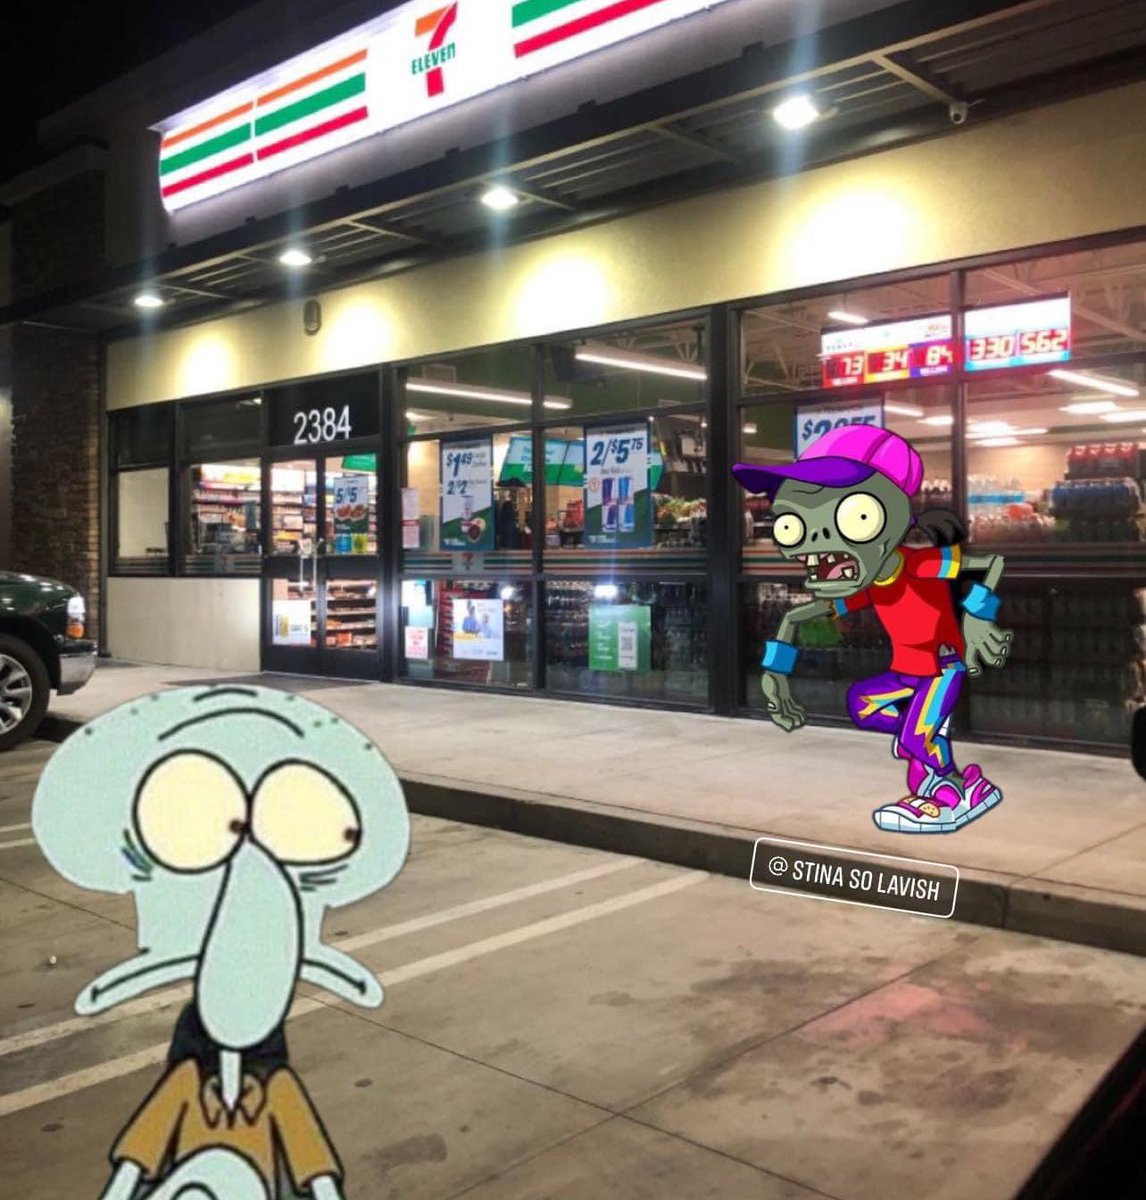 Me being scared to walk past the crackhead infront of 7/11